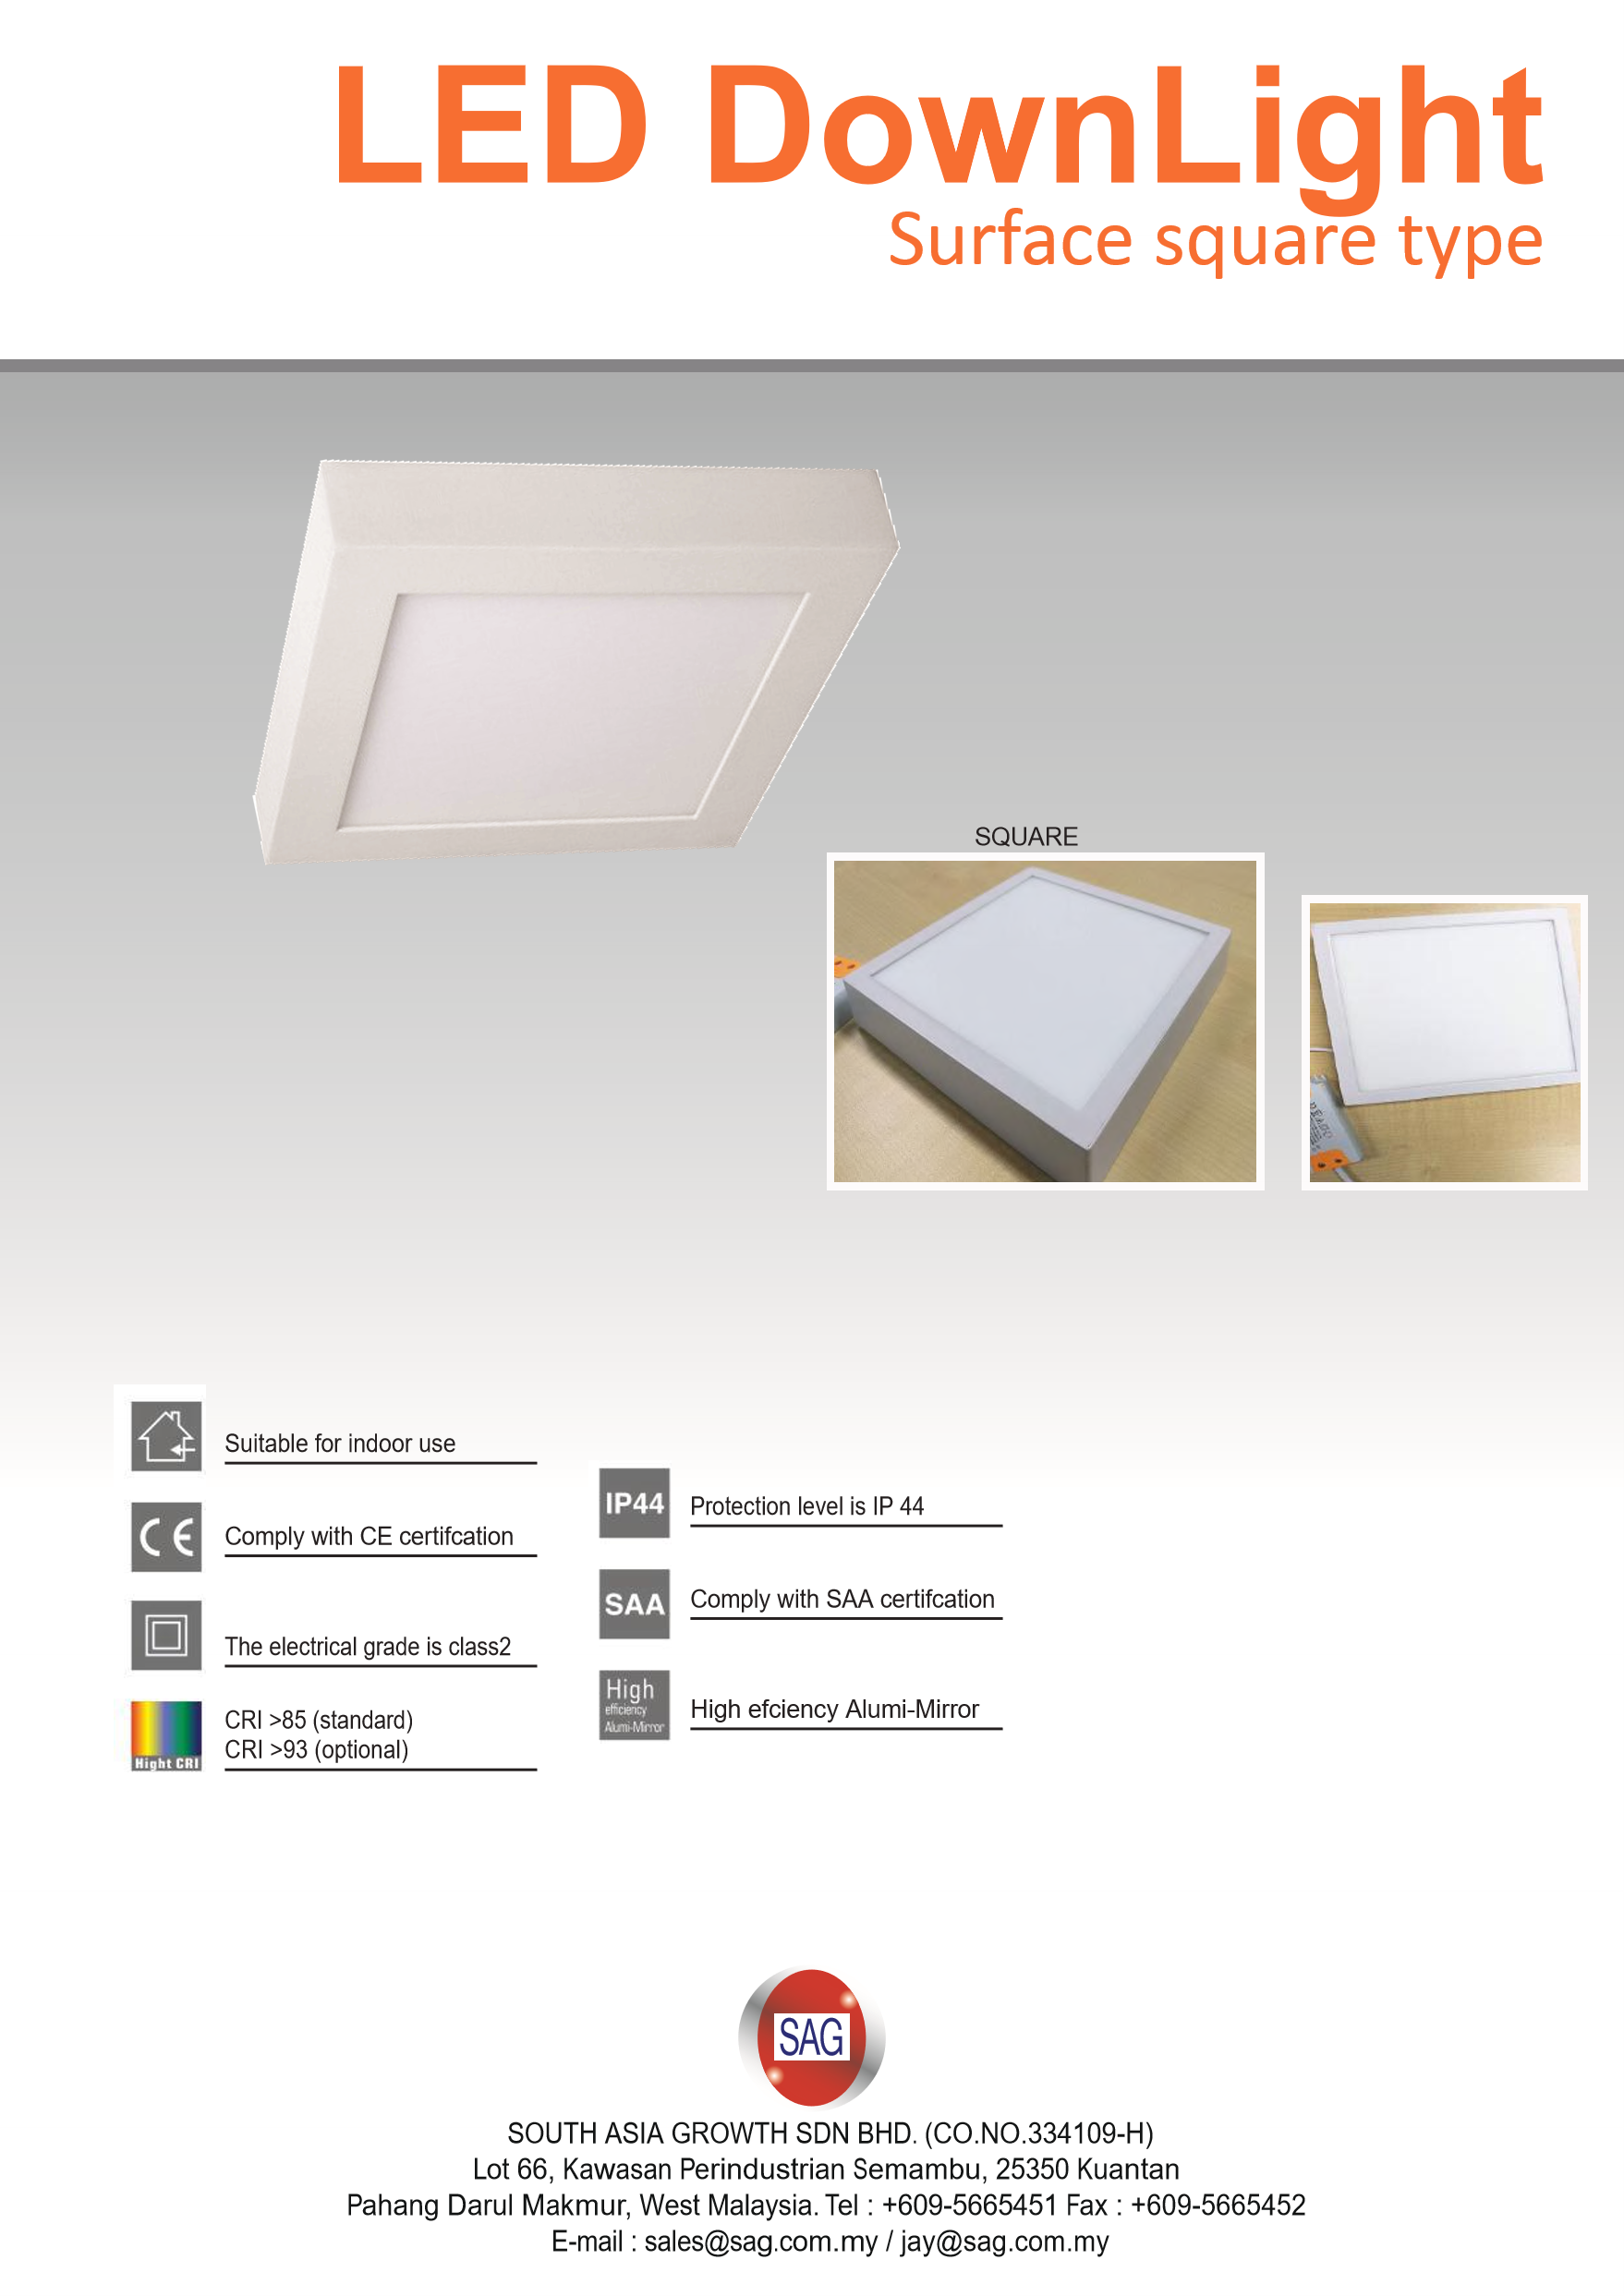 LED Downlight (surface square)